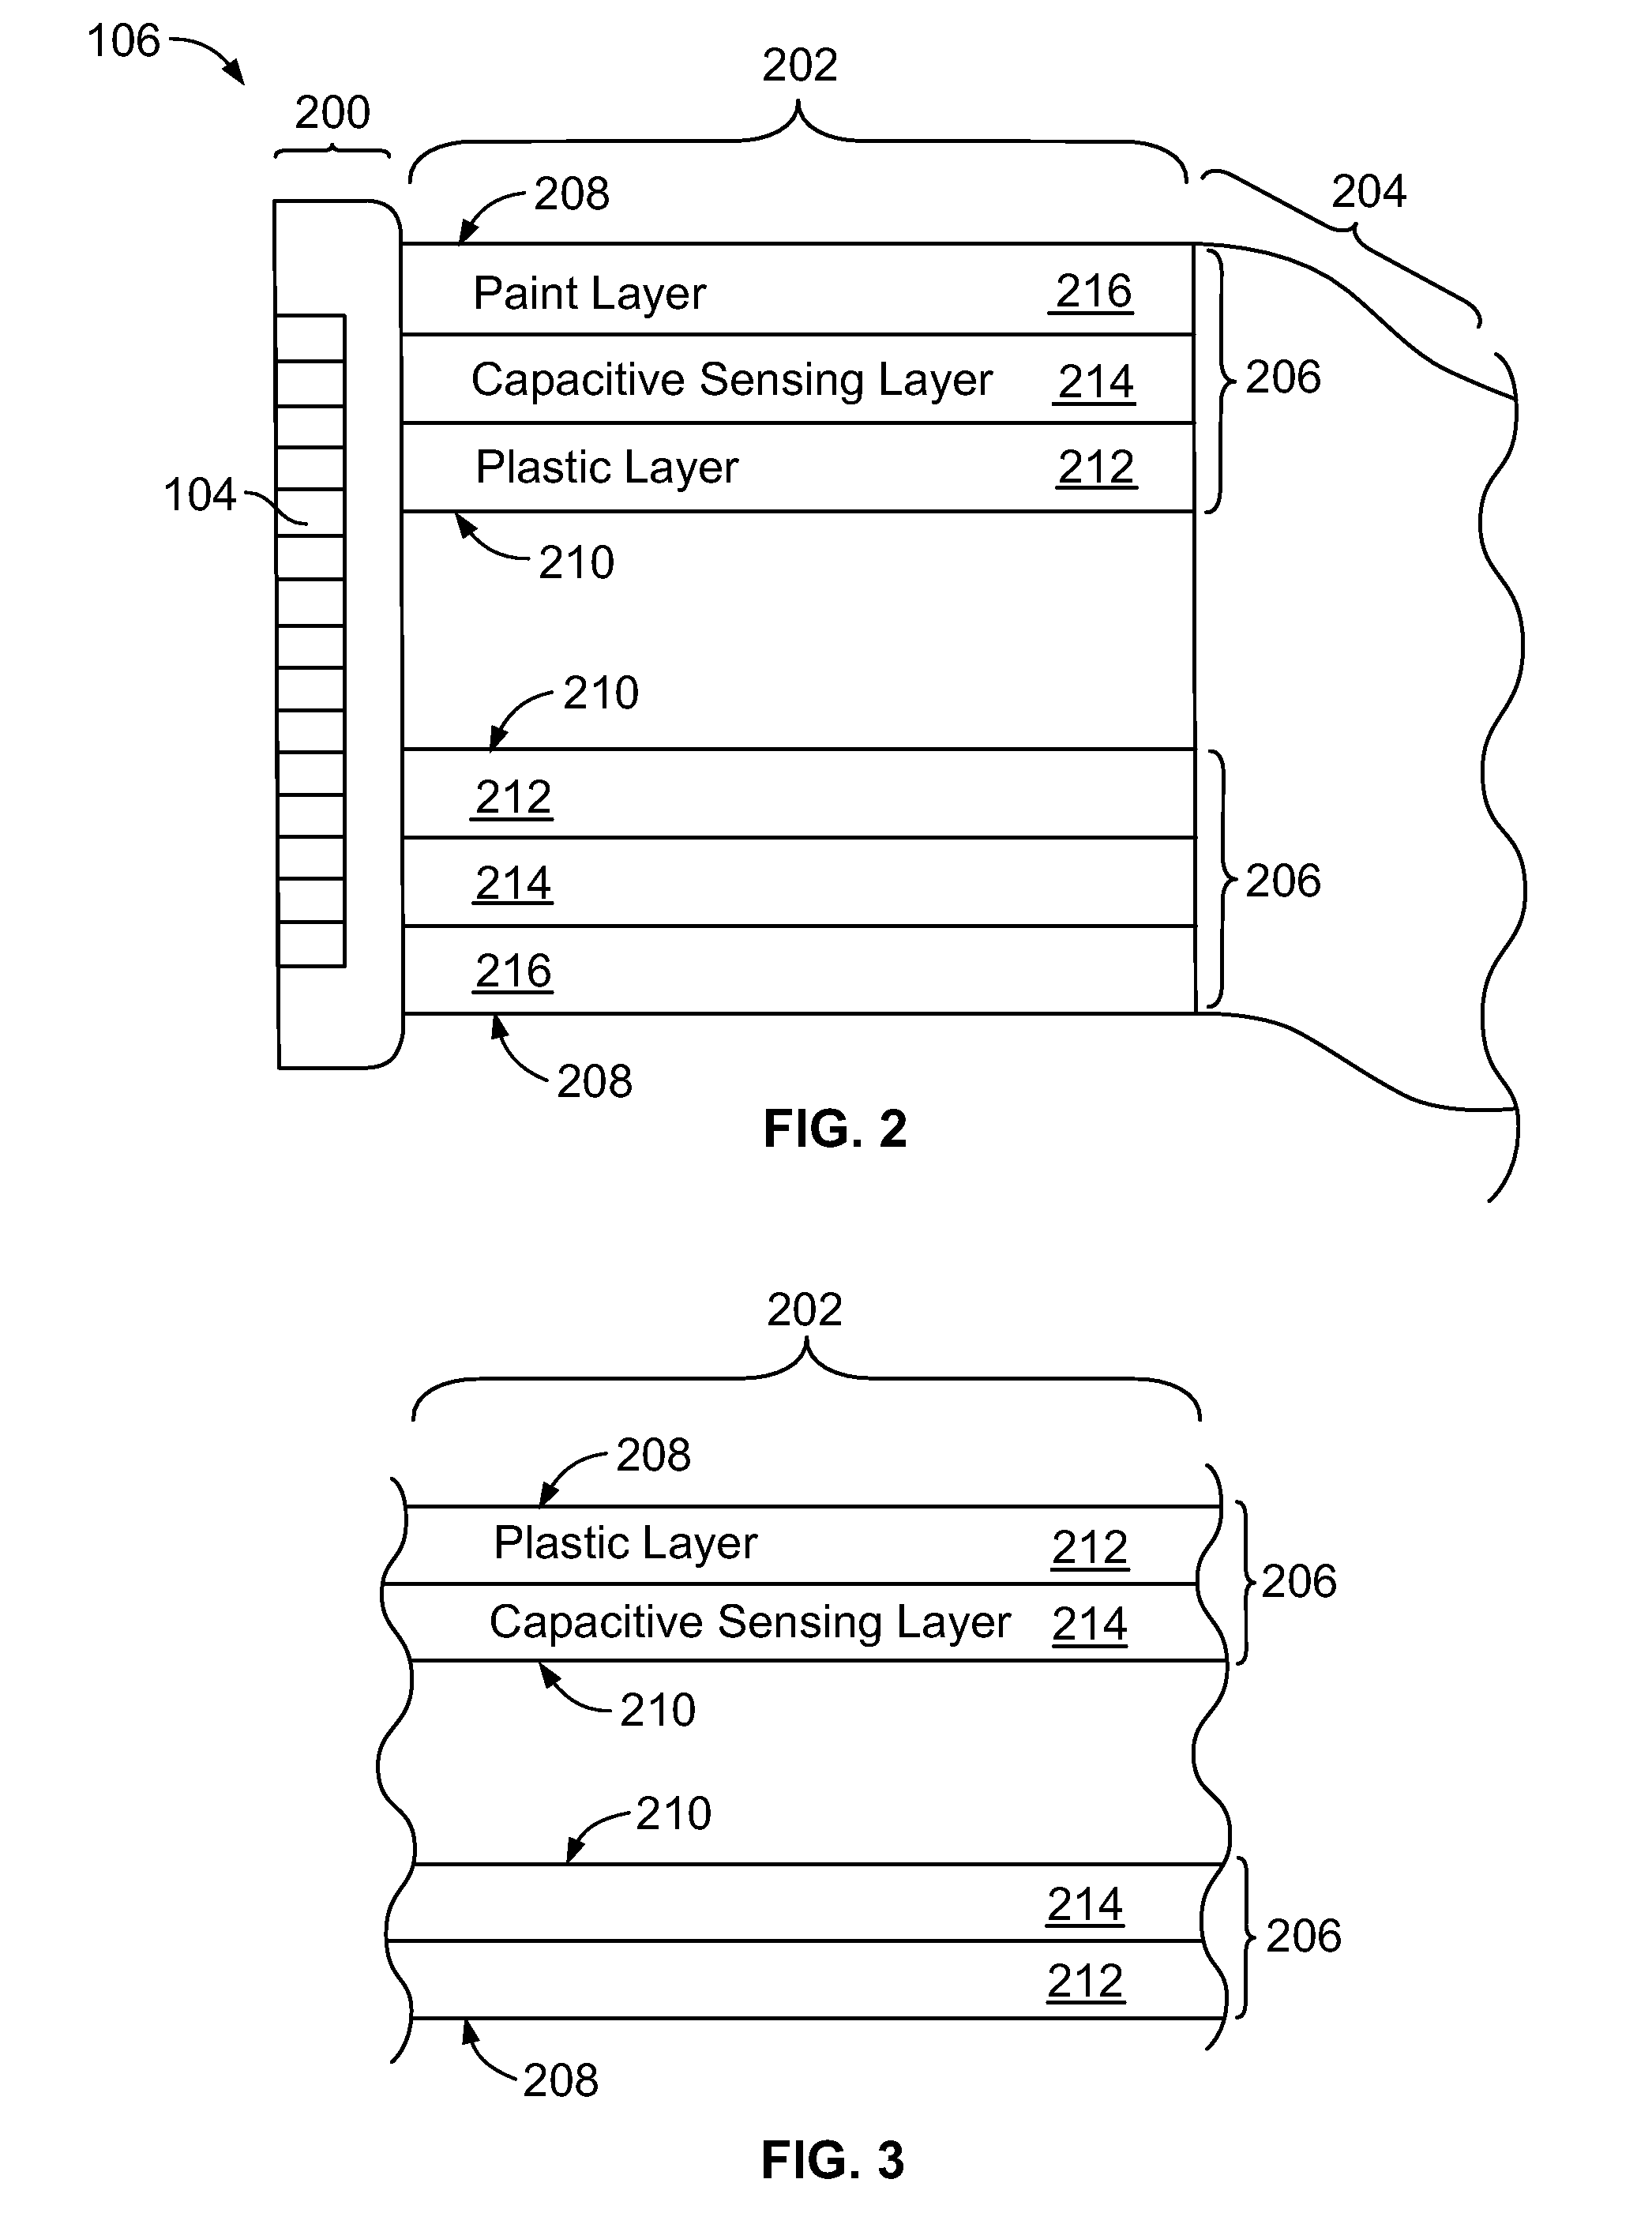 Apparatus and method for controlling an ultrasound system based on contact with an ultrasound probe